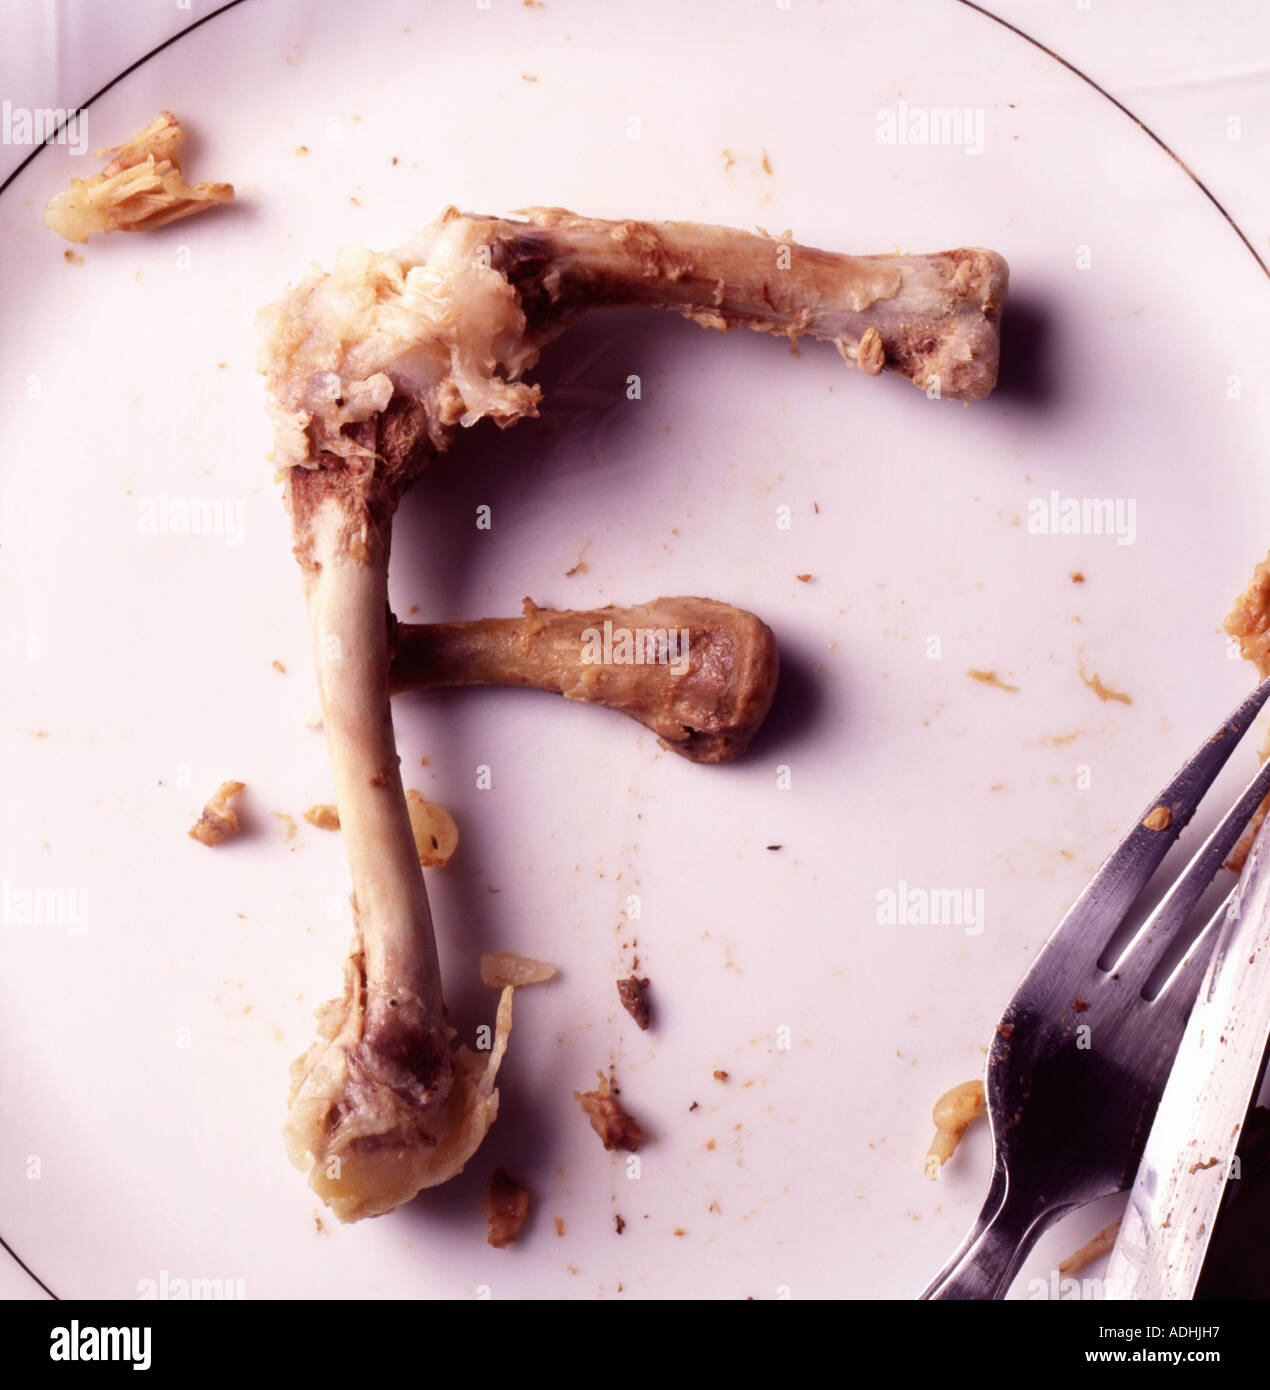 F Letter shaped from chicken bones Stock Photo